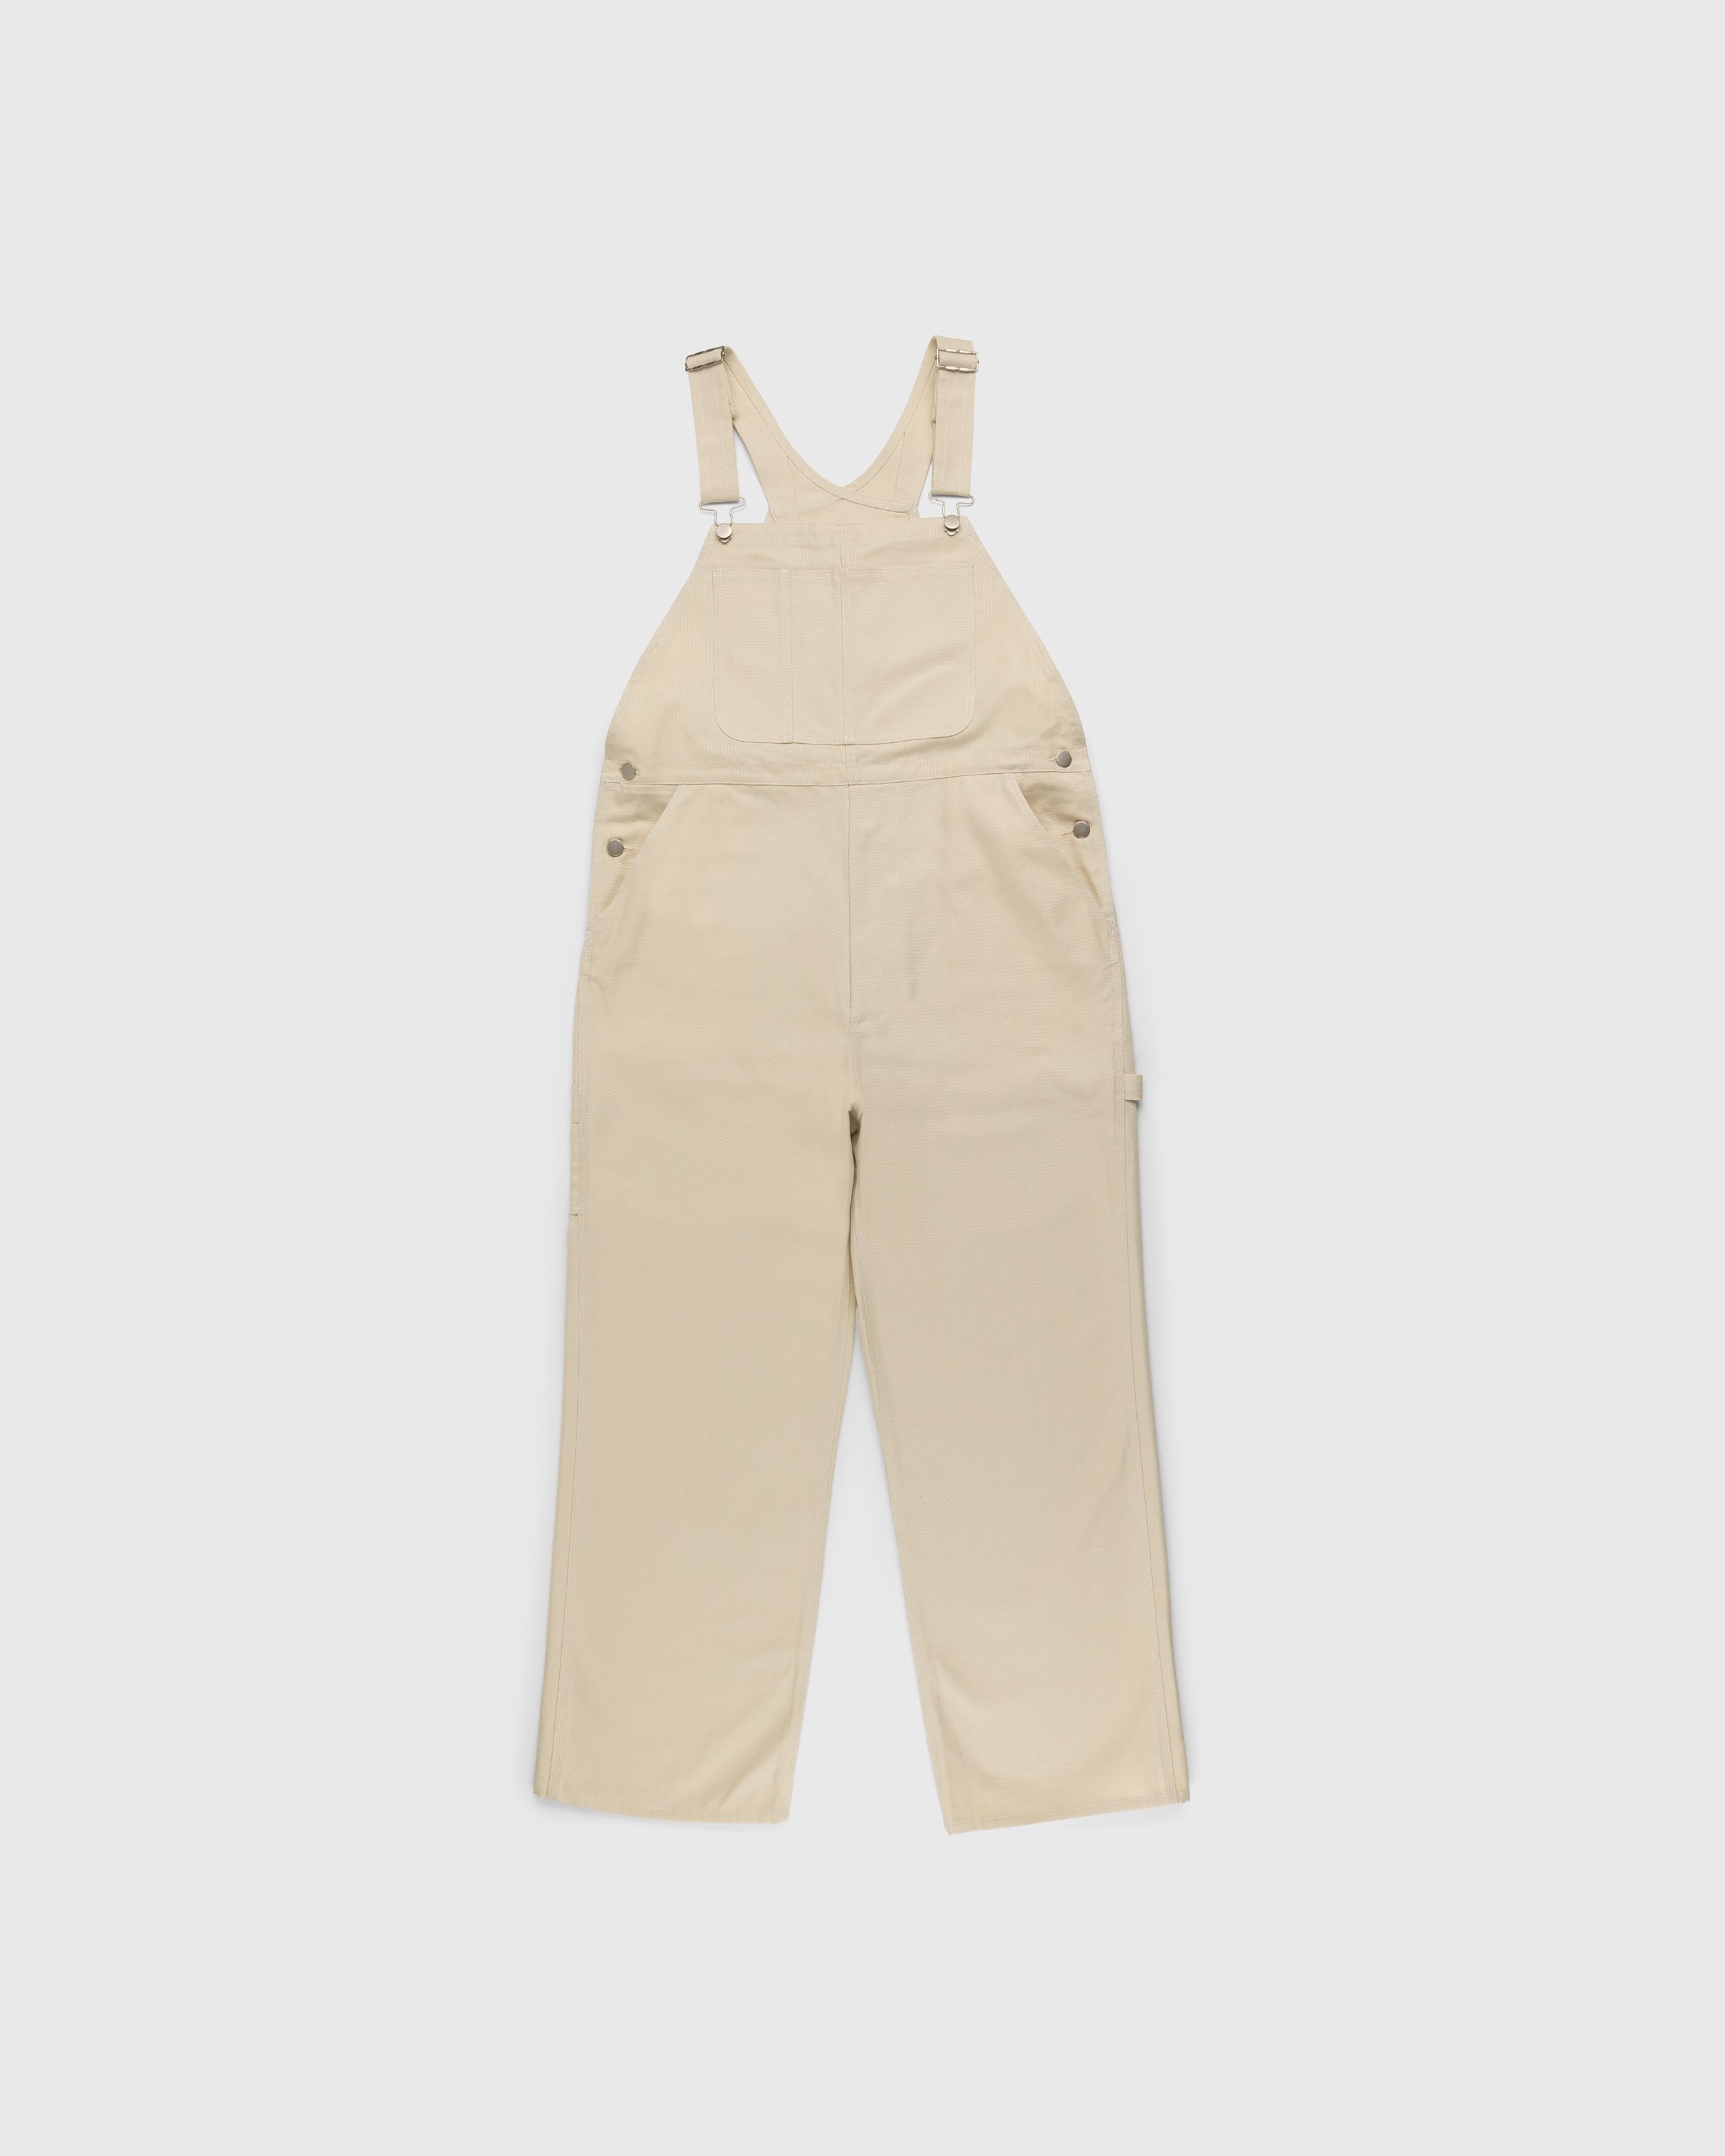 RUF x Highsnobiety – Cotton Overalls Natural - Pants - Beige - Image 2